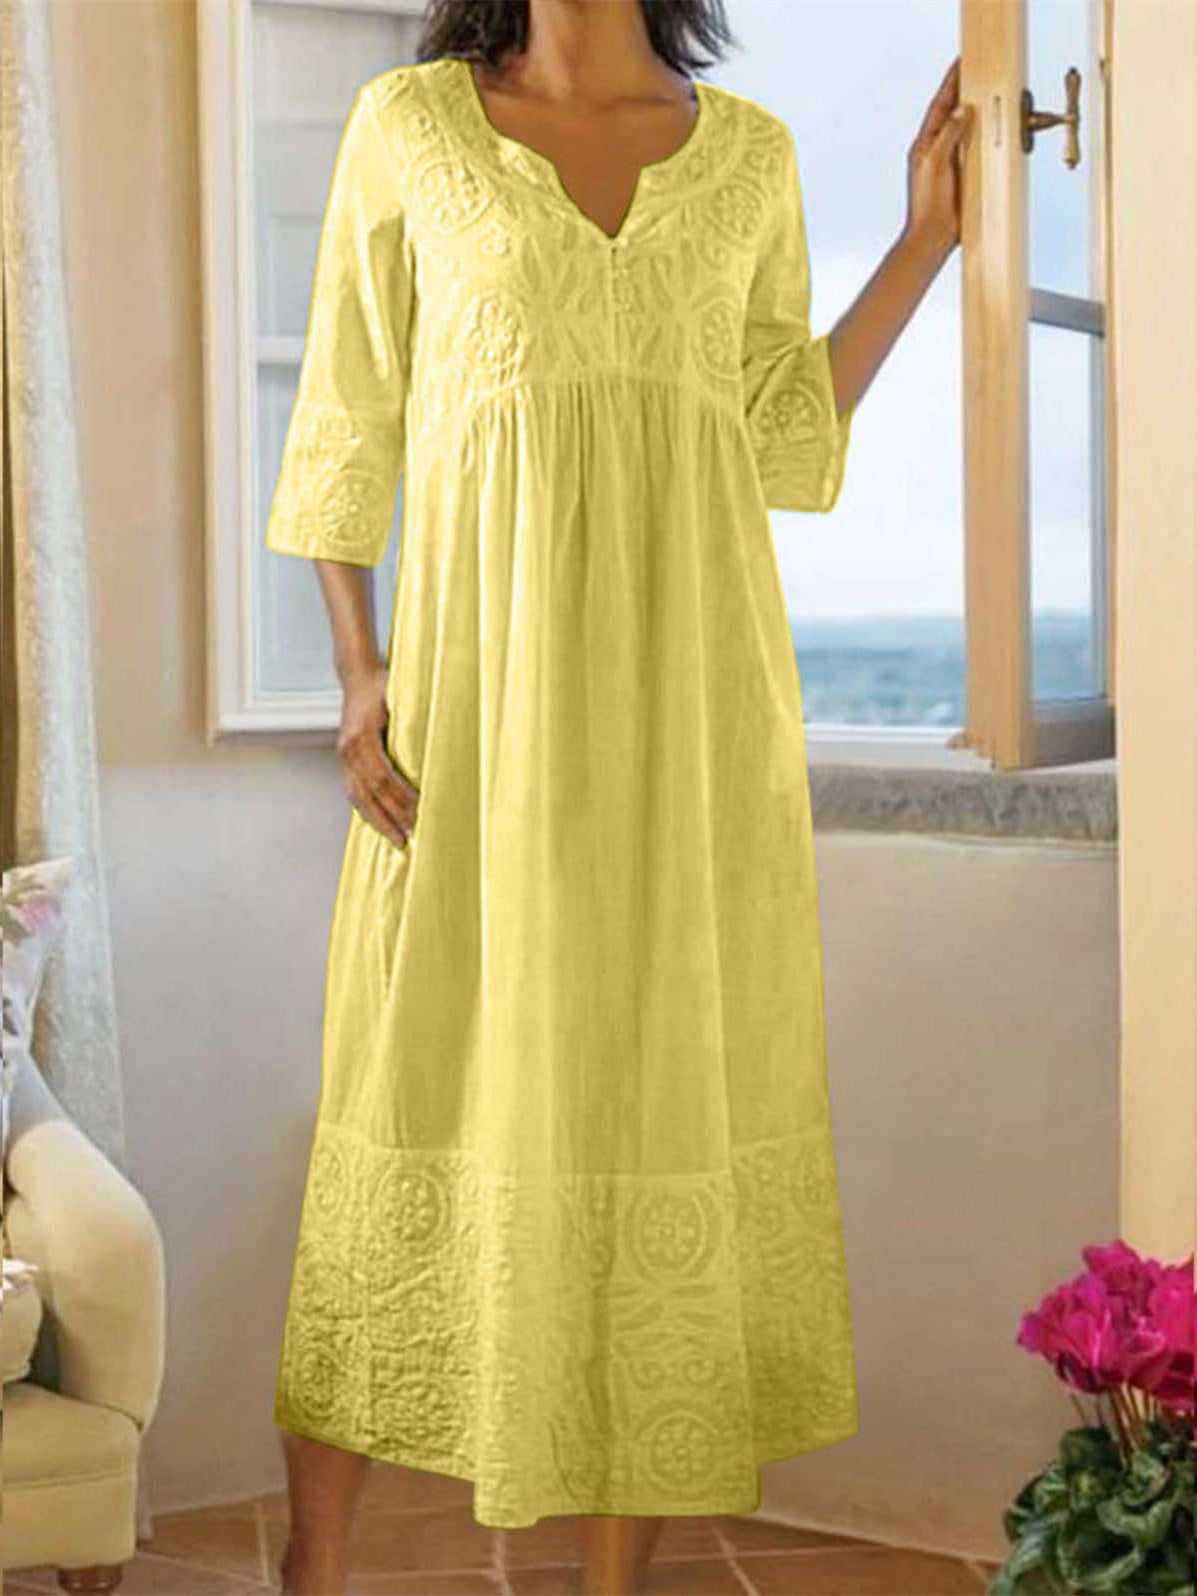 Women 3/4 Sleeve V-neck Lace Floral Printed Maxi Dress